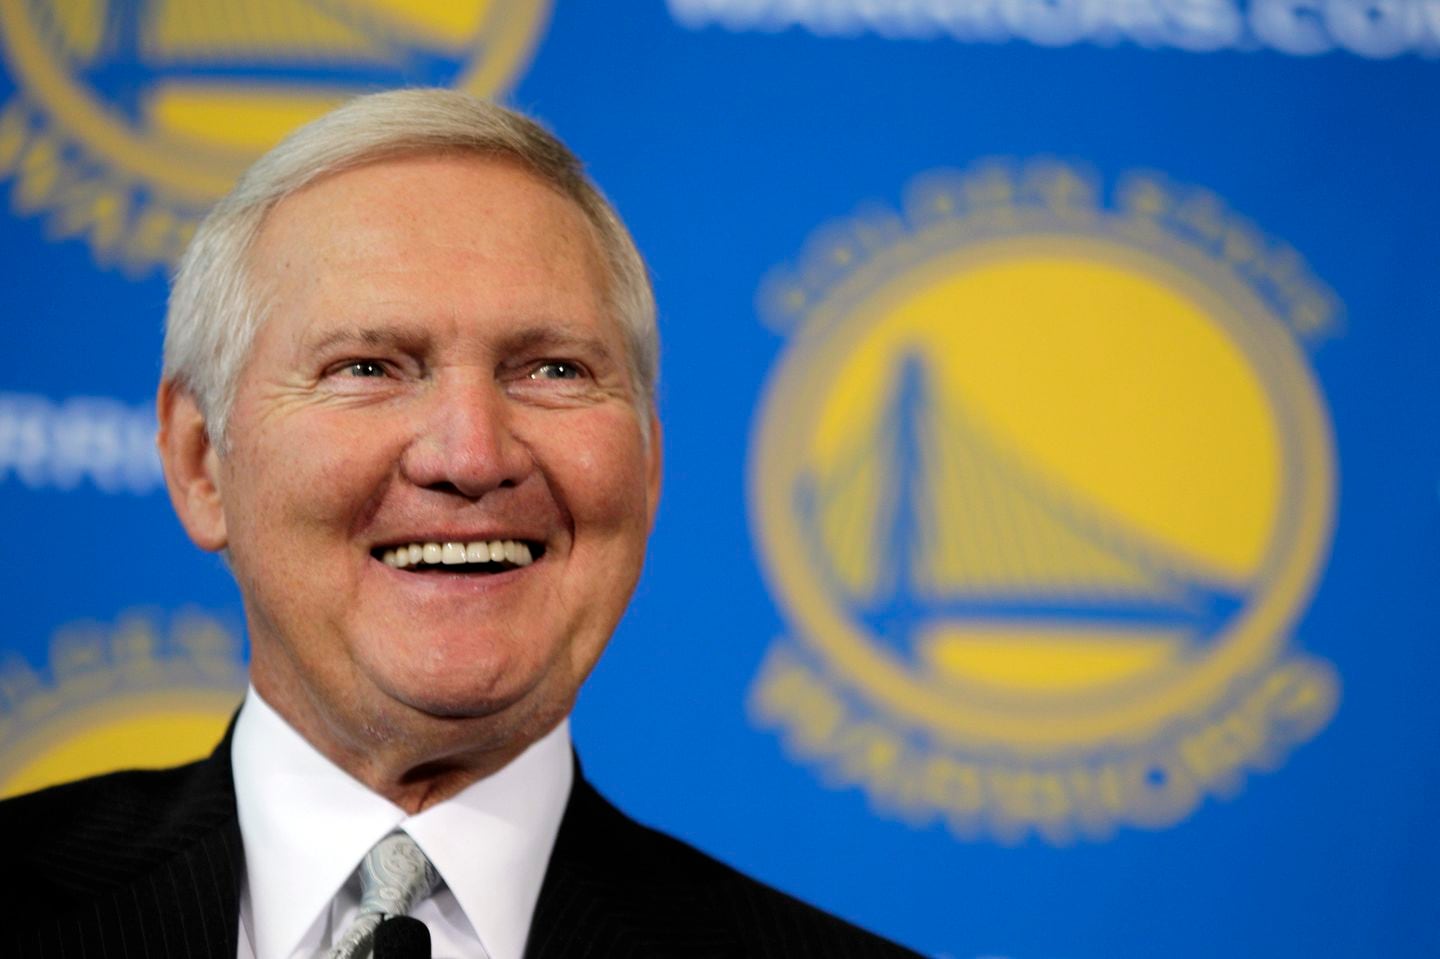 Jerry West was selected to the Basketball Hall of Fame three times in a legendary career as a player and executive.